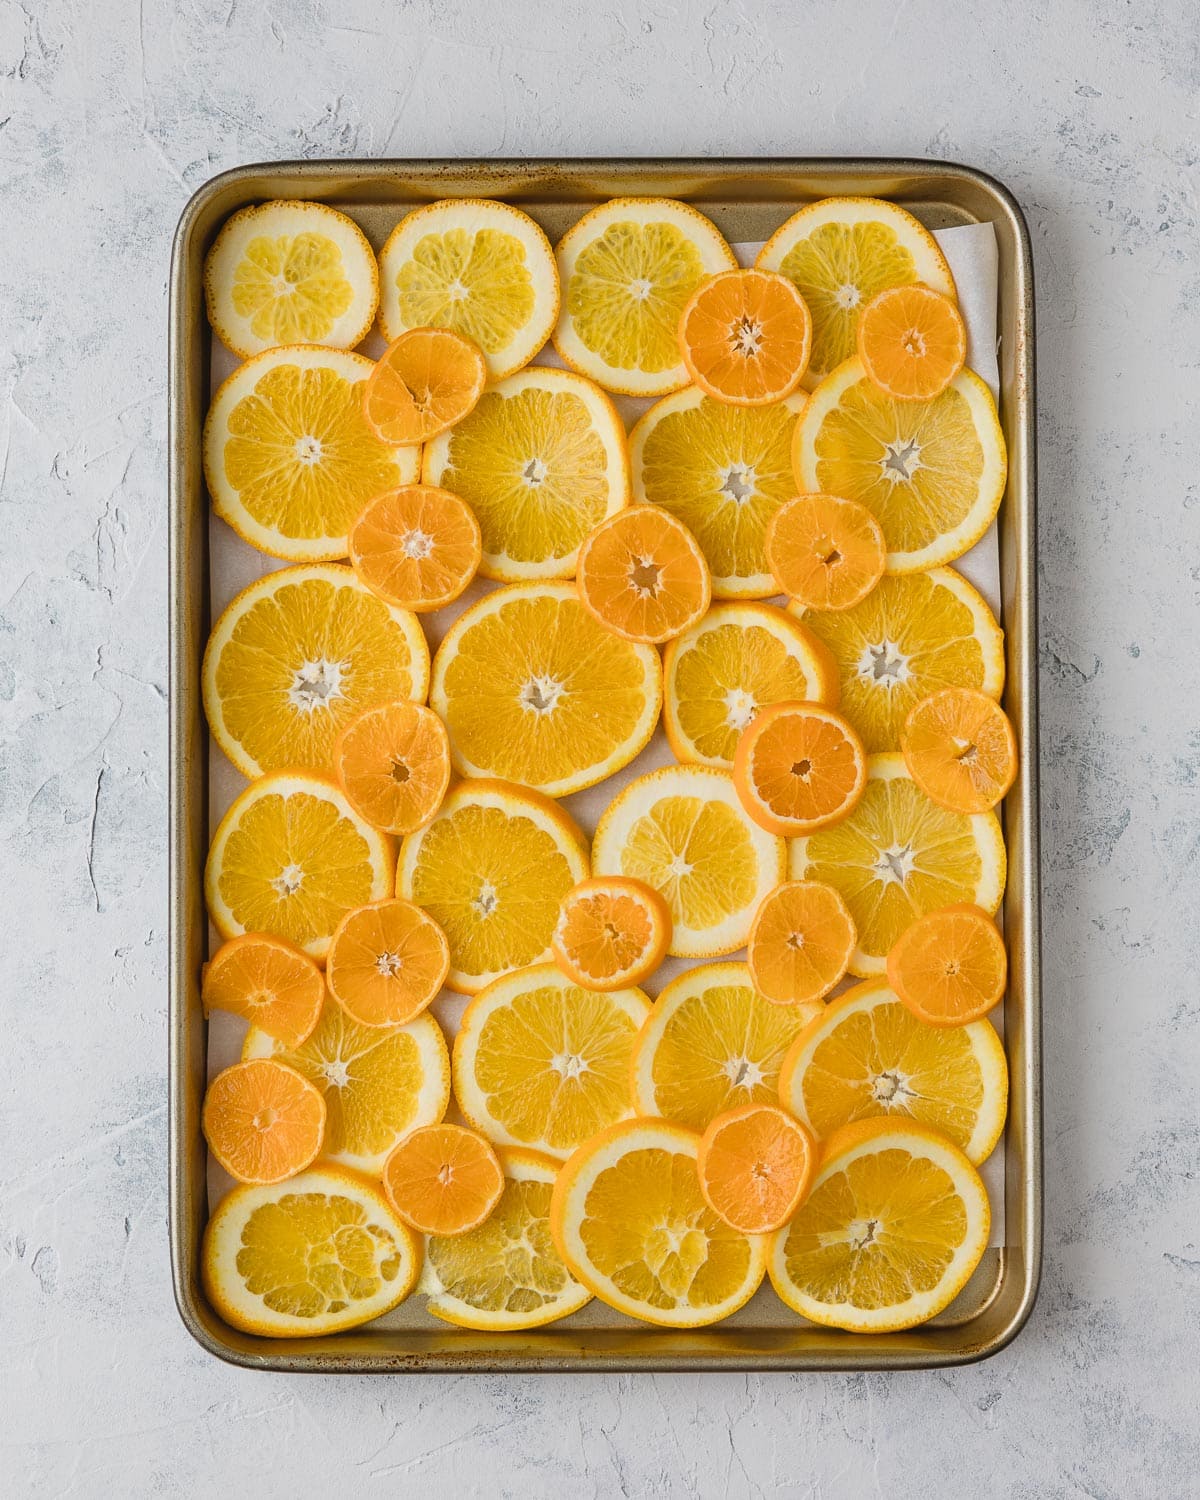 A baking tray filled with sliced oranges and clementines.